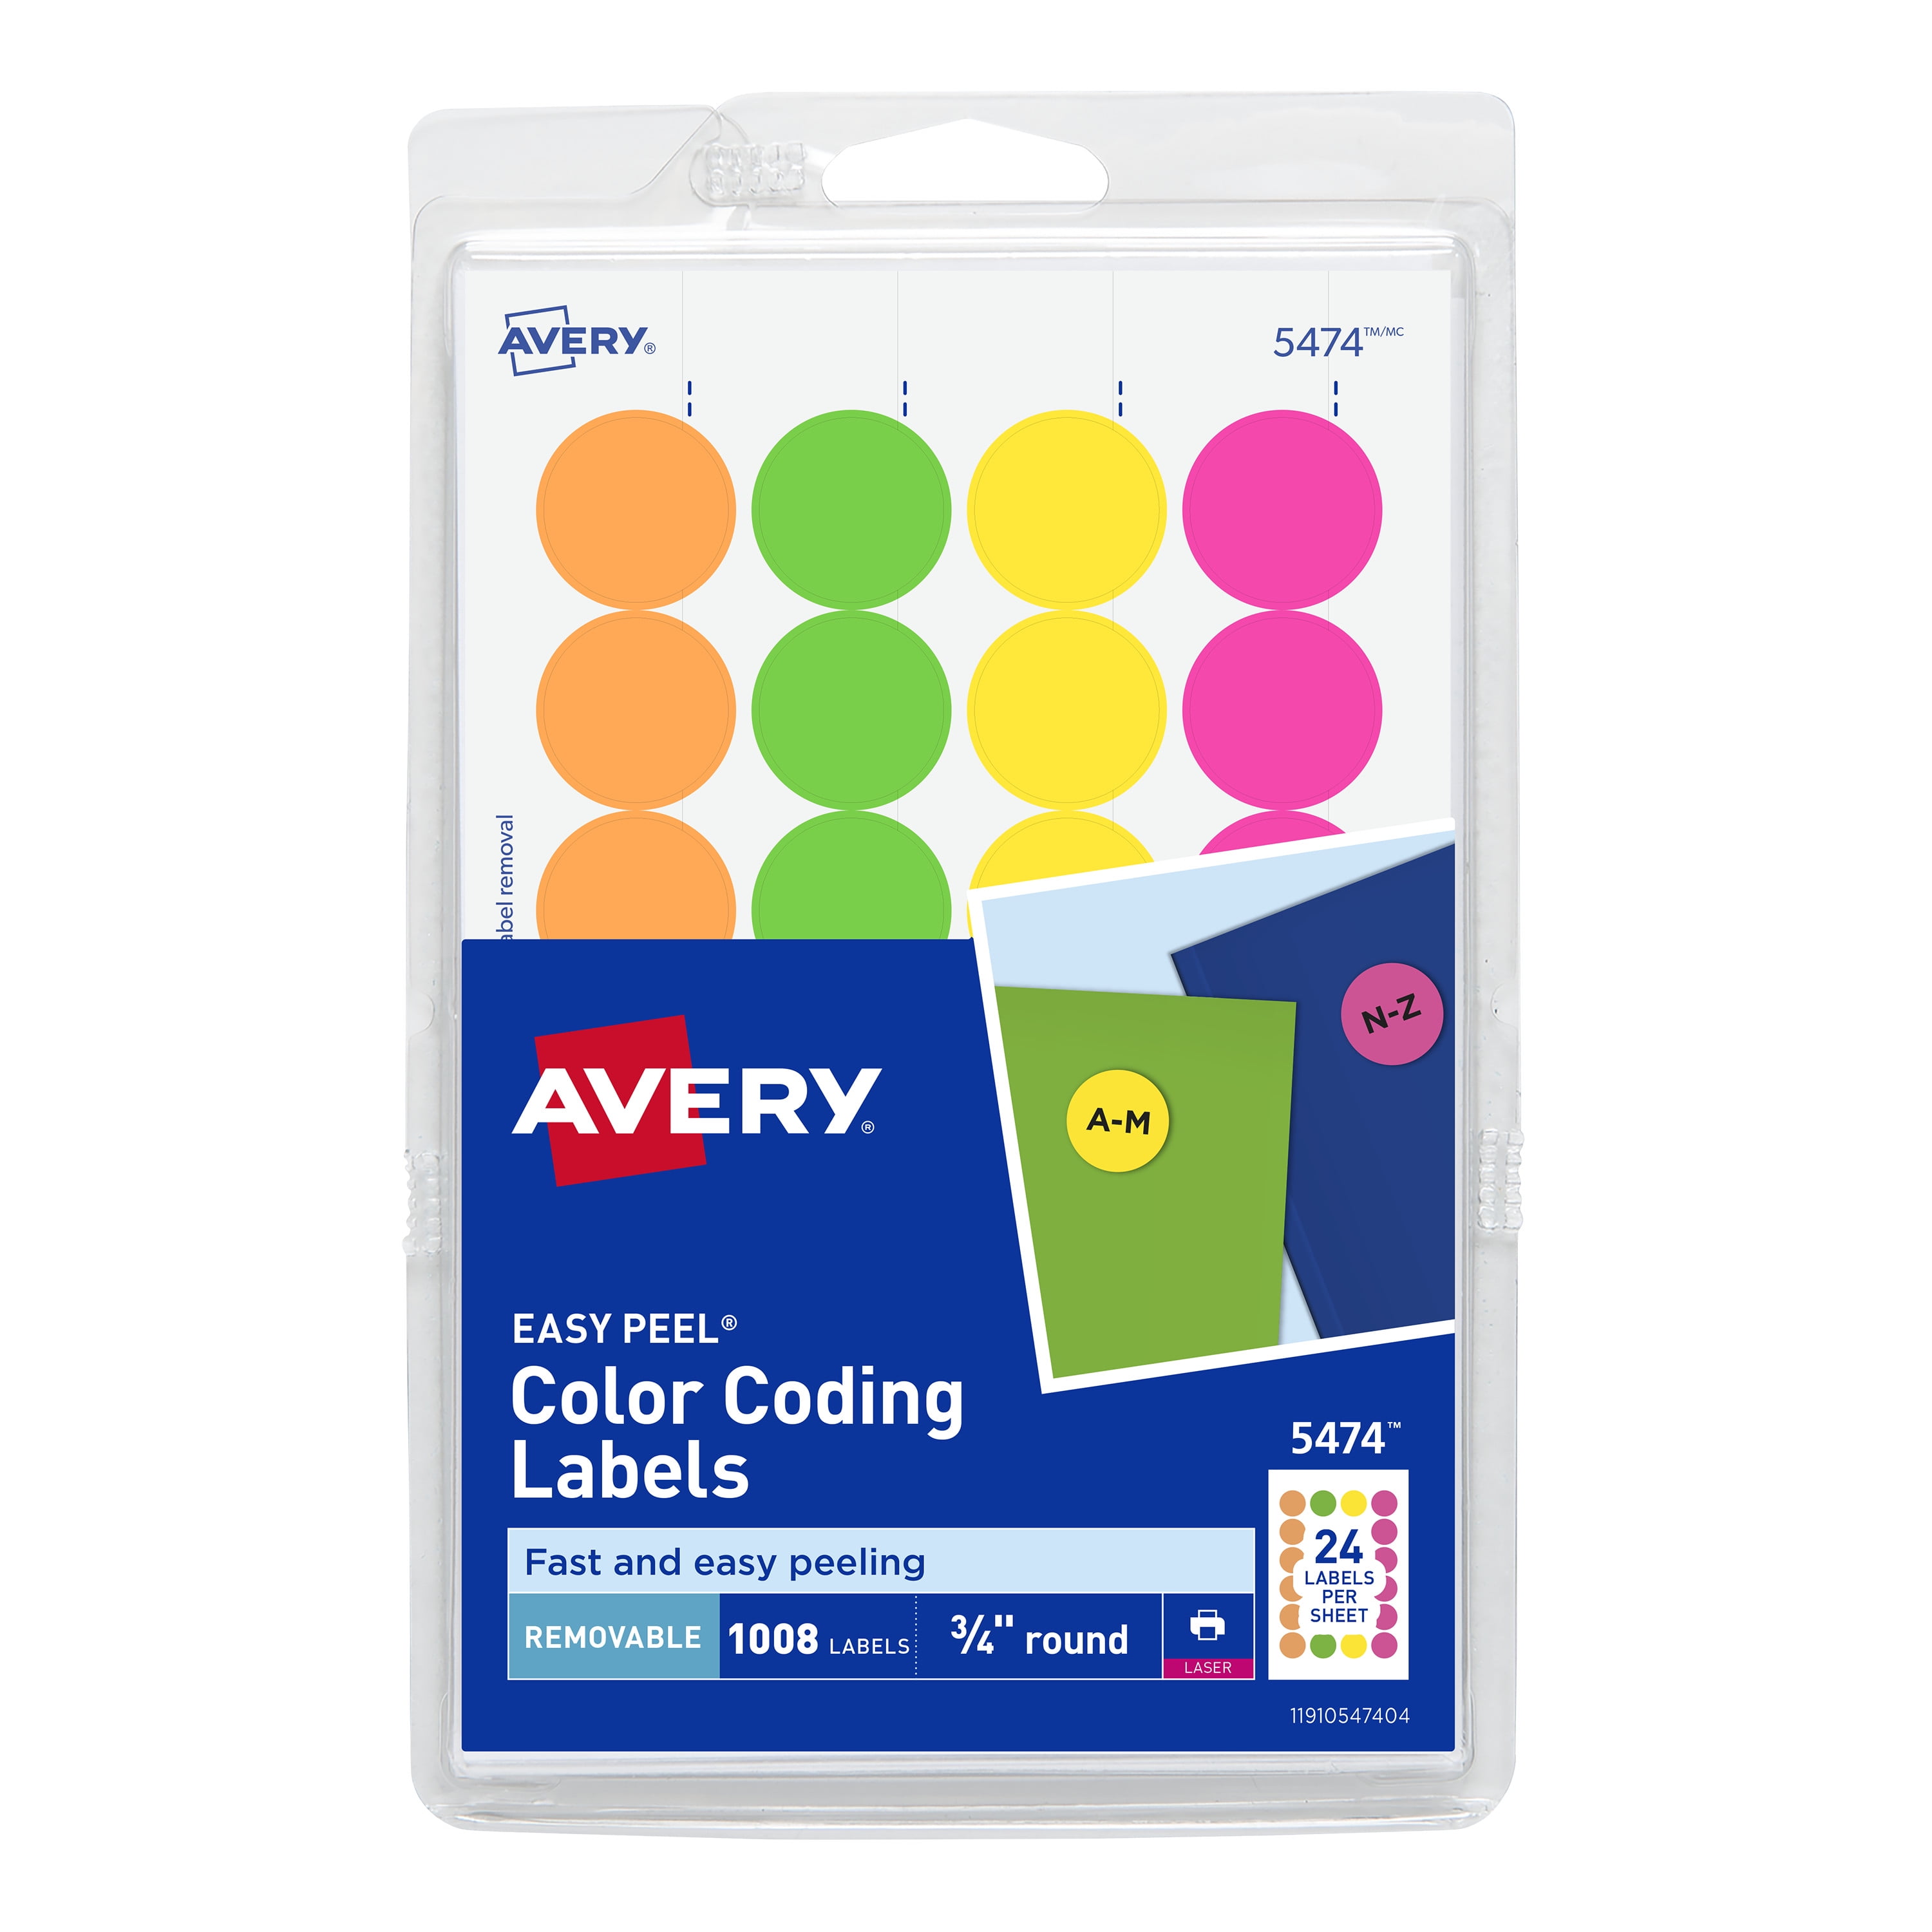 LOT of 2 Avery Neon Color Coding Dots Self-Adhesive Labels 1/4'' Dia BB34/22 